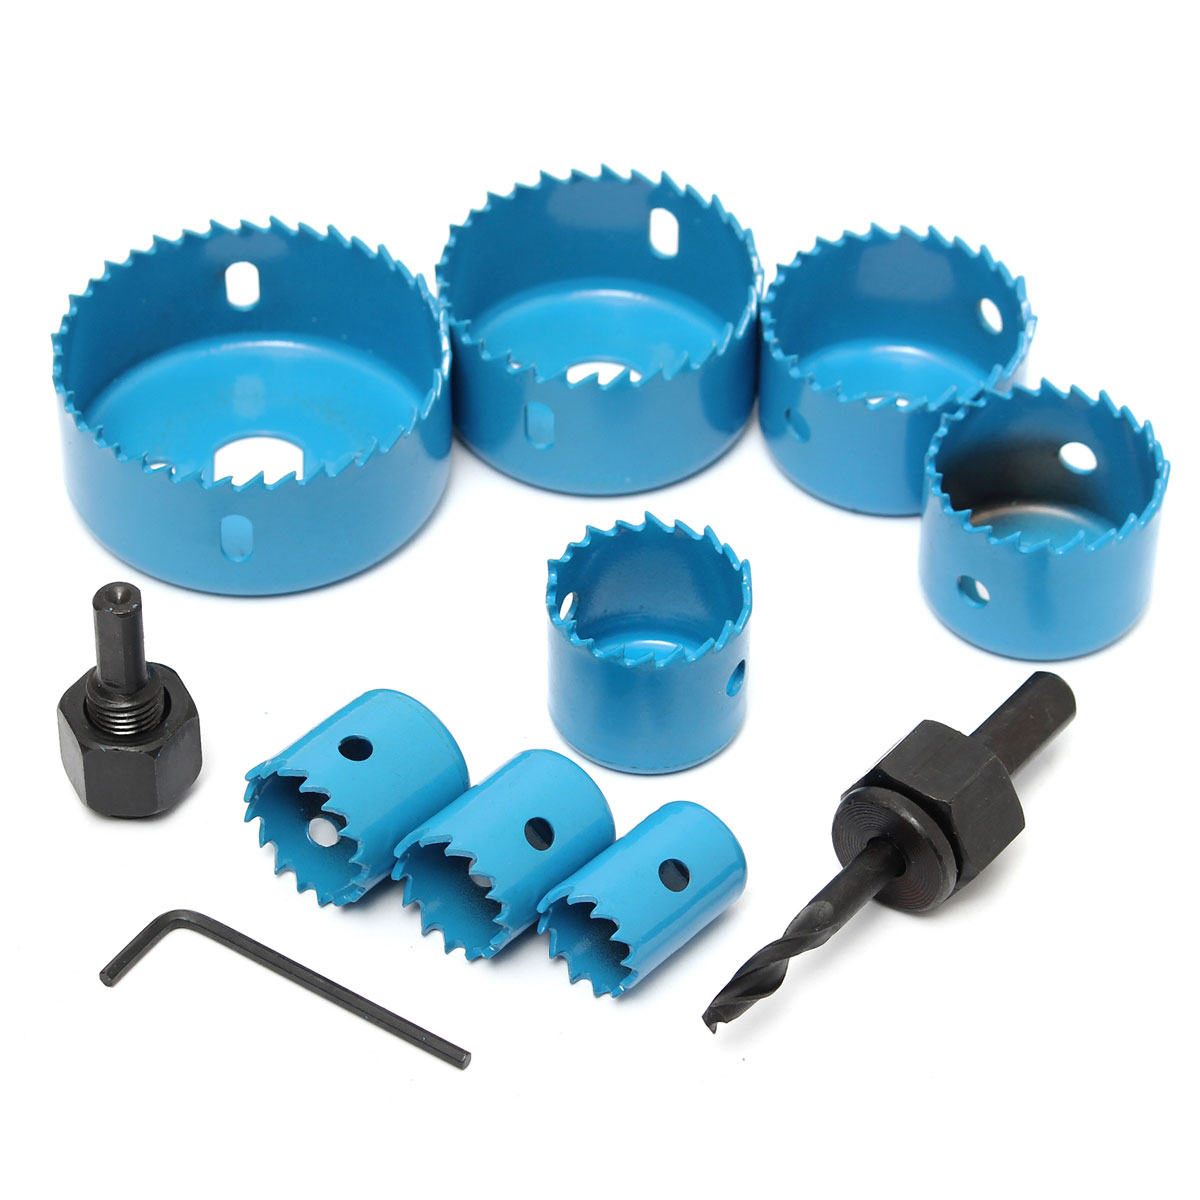 8pcs-Blue-Hole-Saw-Cutter-Set-with-Hex-Wrench-Wood-Alloy-Iron-Cutter-for-Woodworking-1554163-1